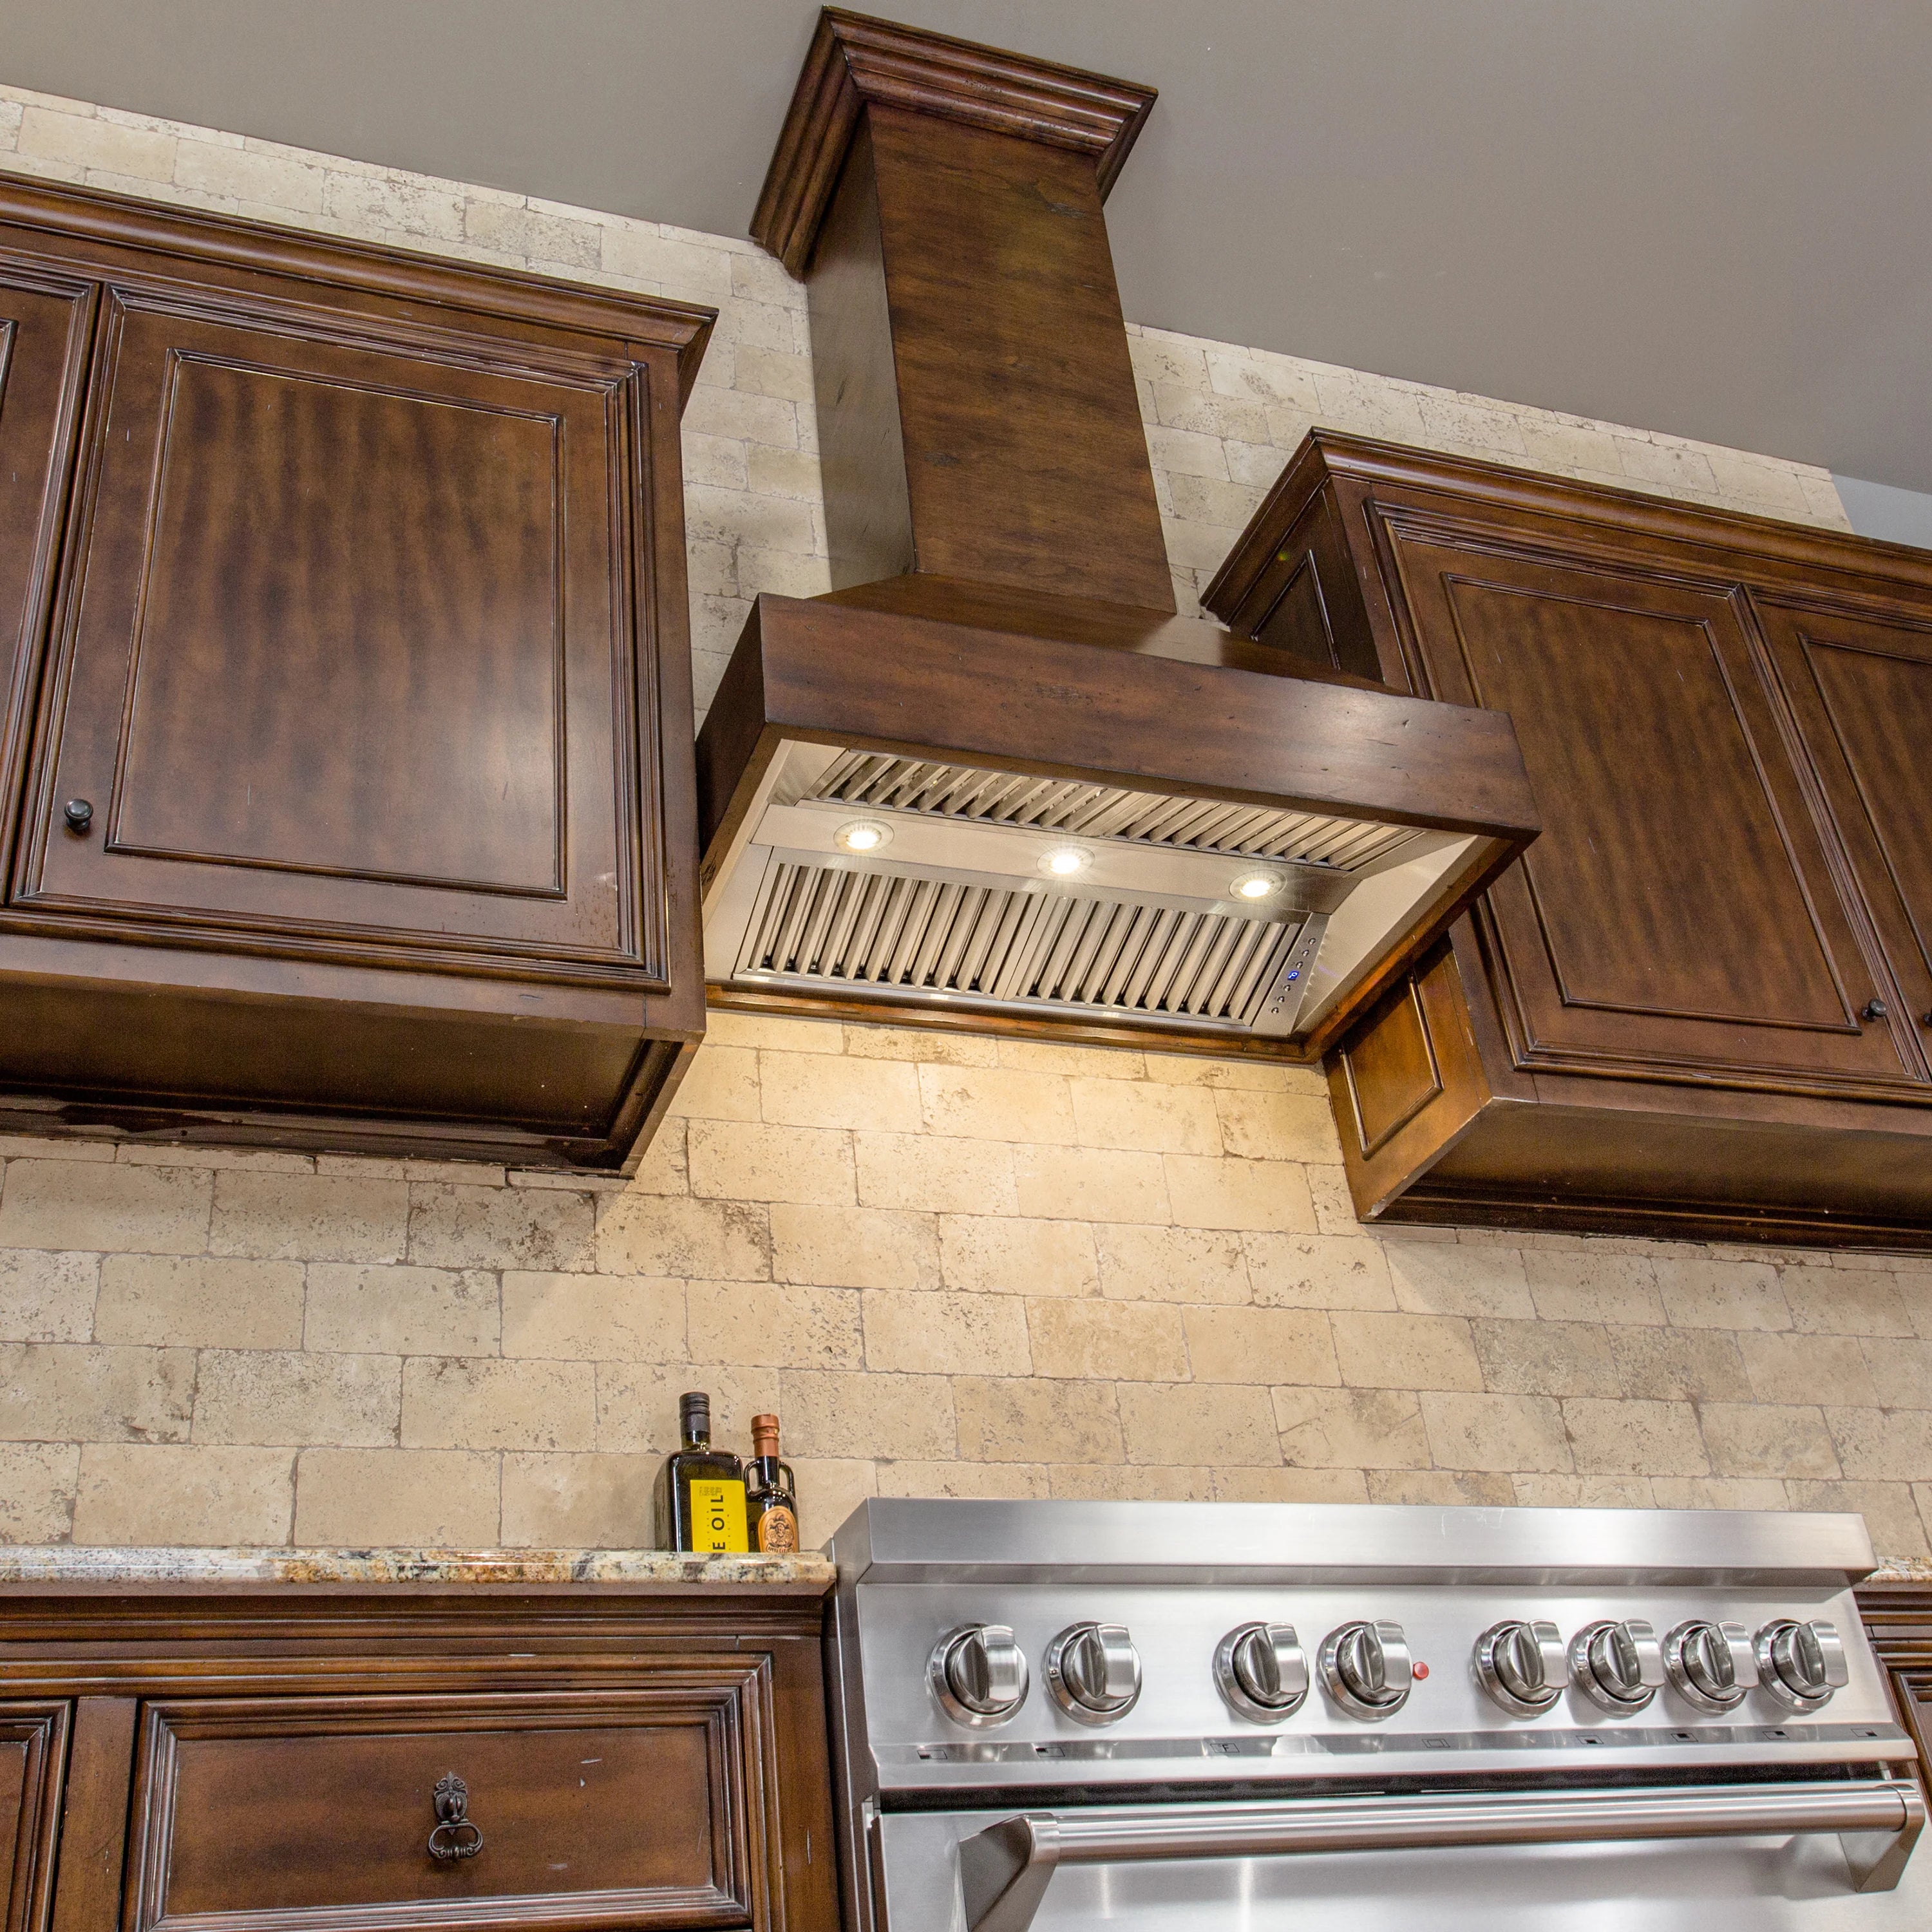 ZLINE Wooden Wall Mount Range Hood in Walnut and Hamilton - Includes Remote Motor (355WH-RD-3)